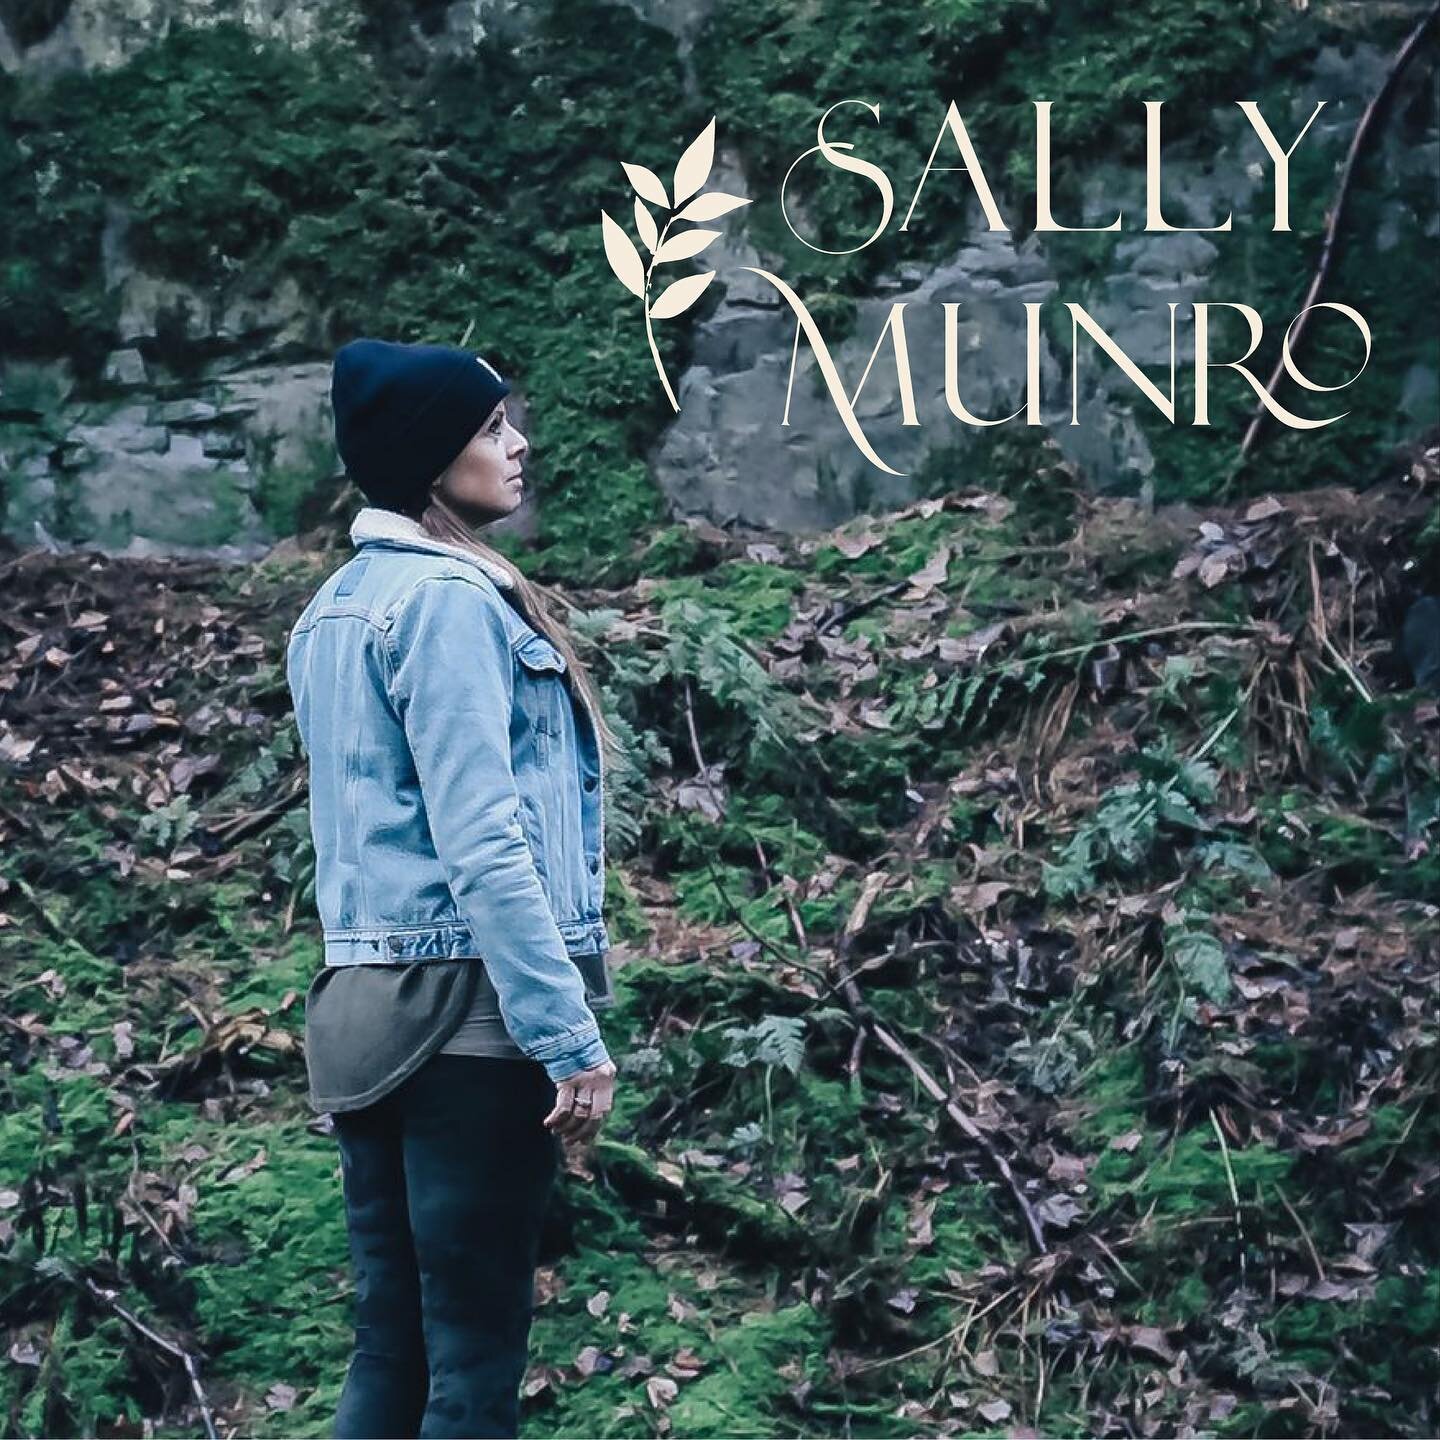 I&rsquo;ve got news&hellip;my brand new website is LIVE!!! Let me know what you think! 🤓
Sallymunro.co.uk